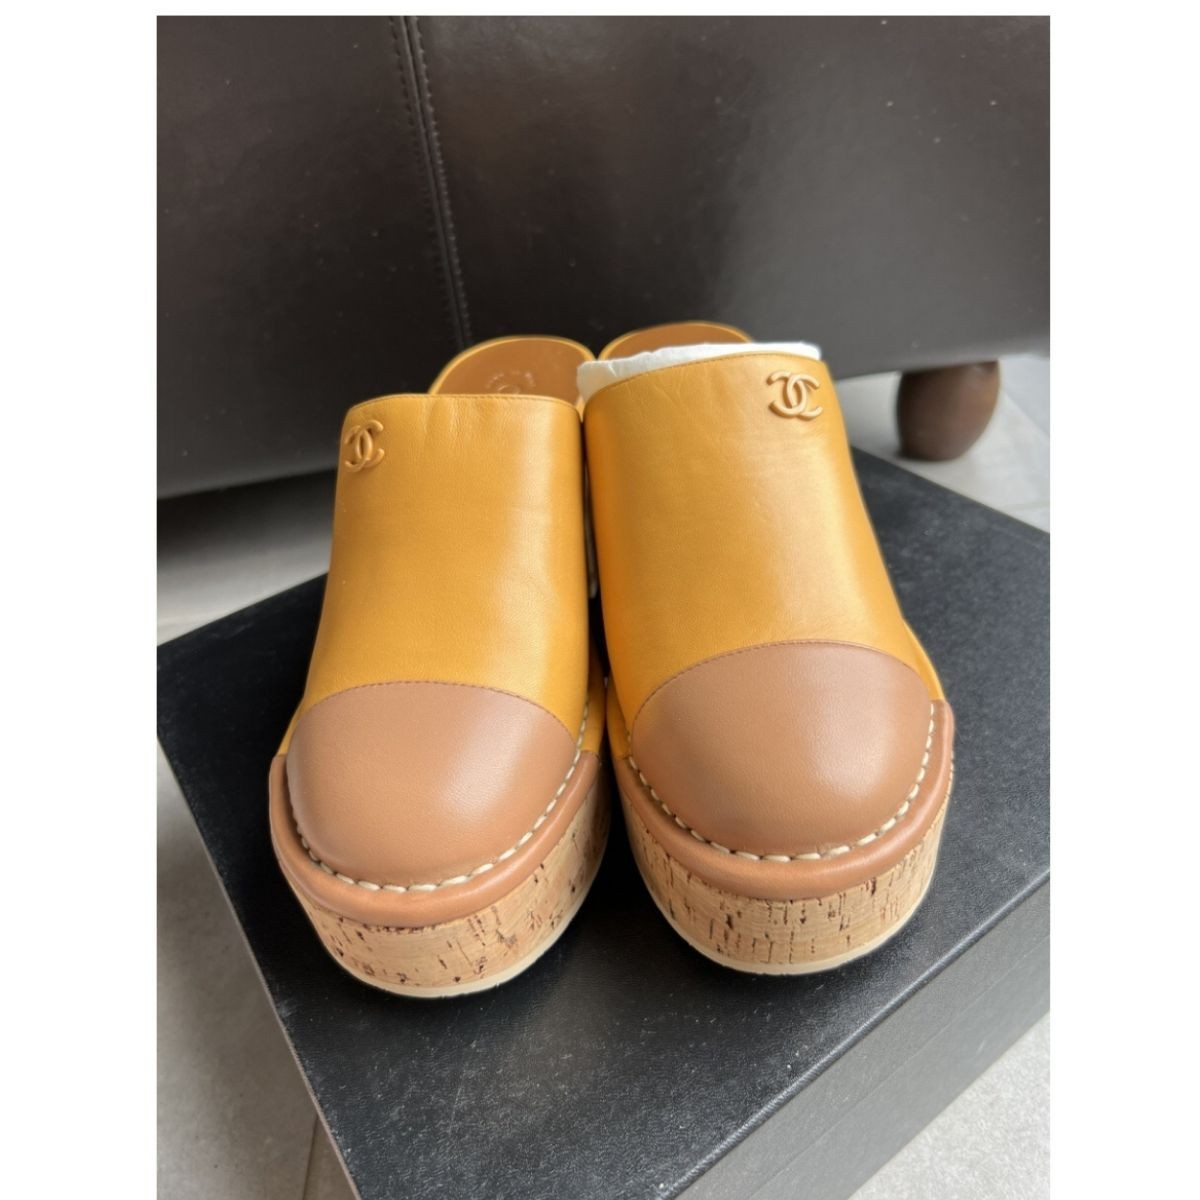 Chanel leather and cork clogs size 38 brand new